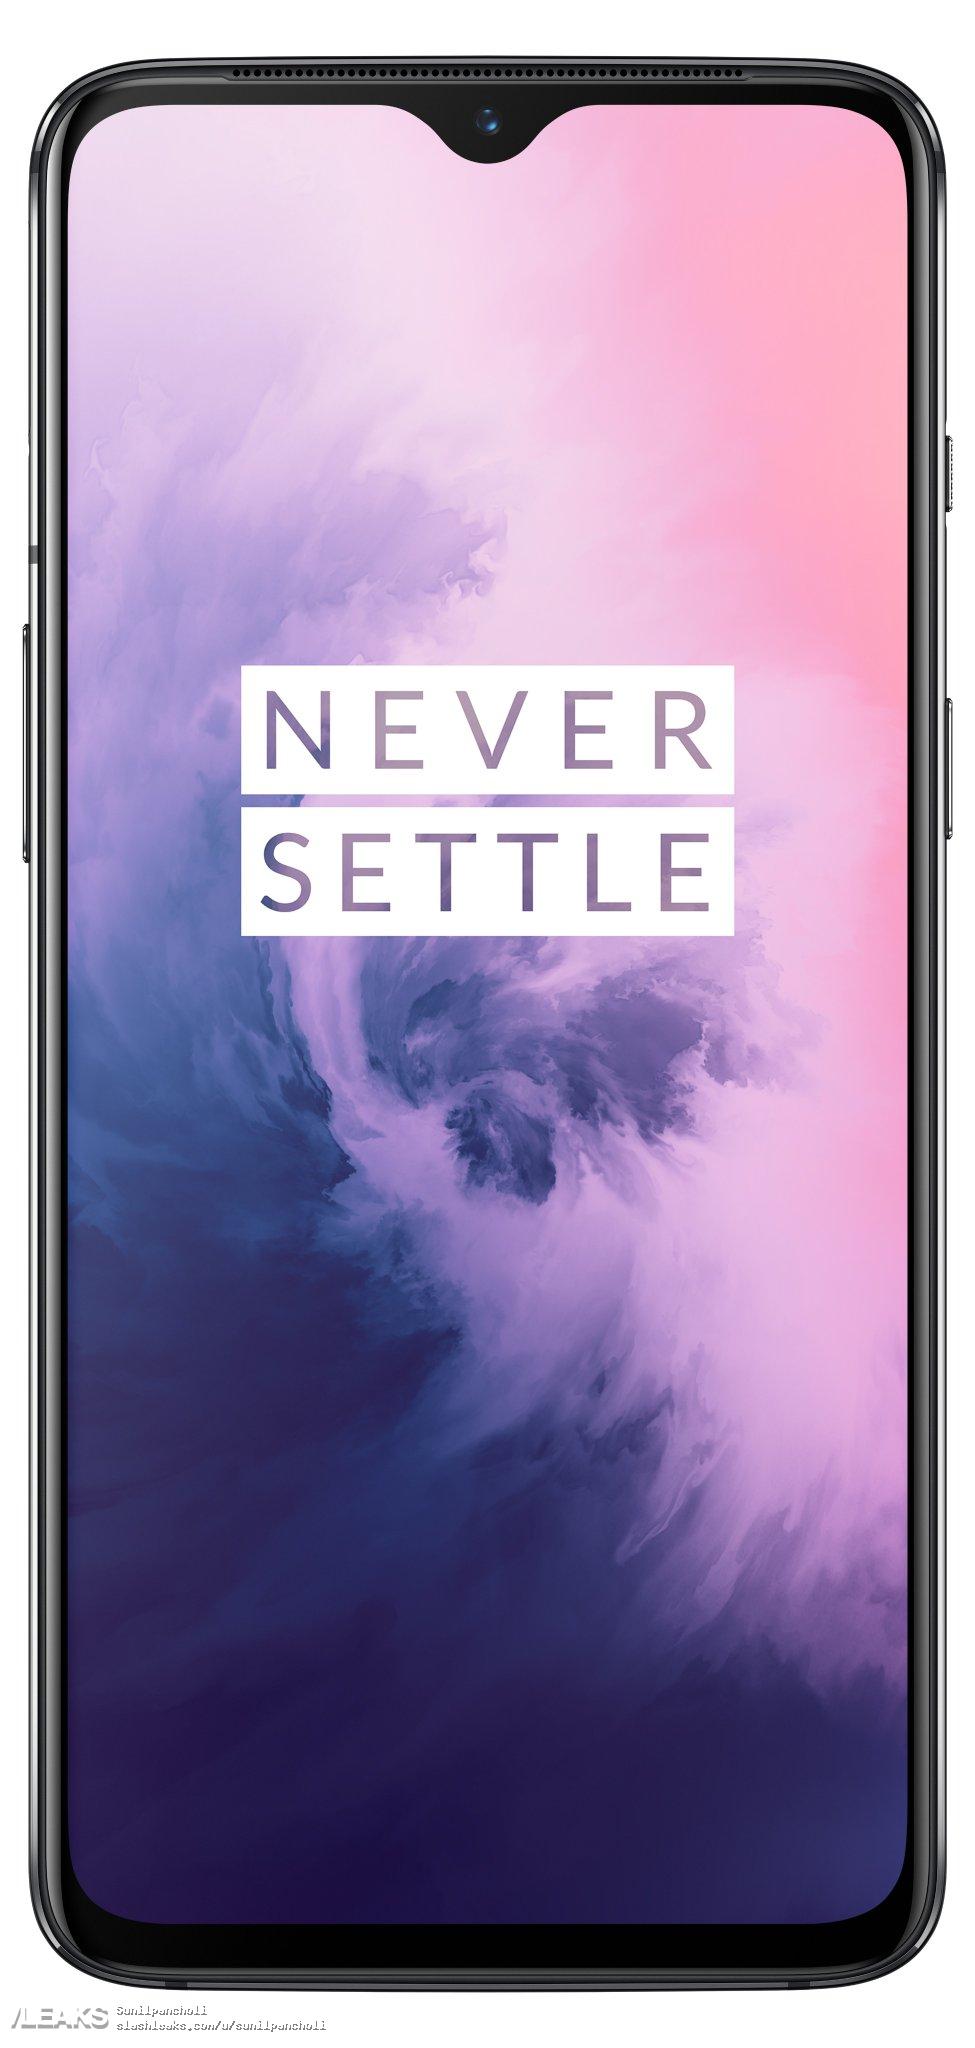 oneplus 7 standard version with all details no 3.5mm jack hope stereo sound